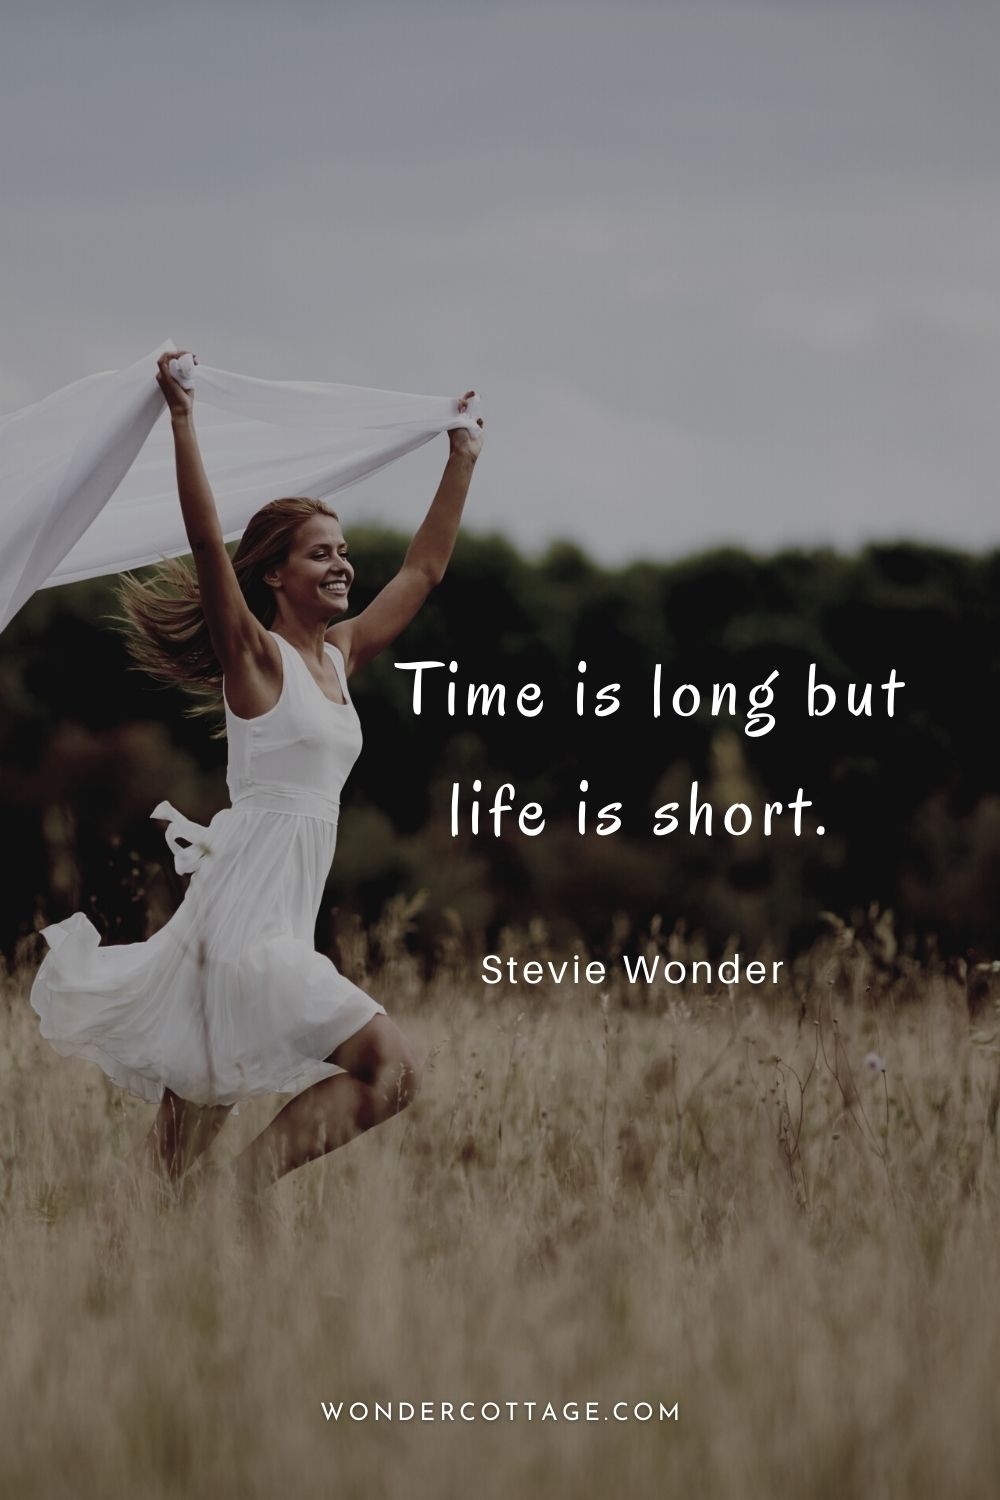 Time is long but life is short.  Stevie Wonder